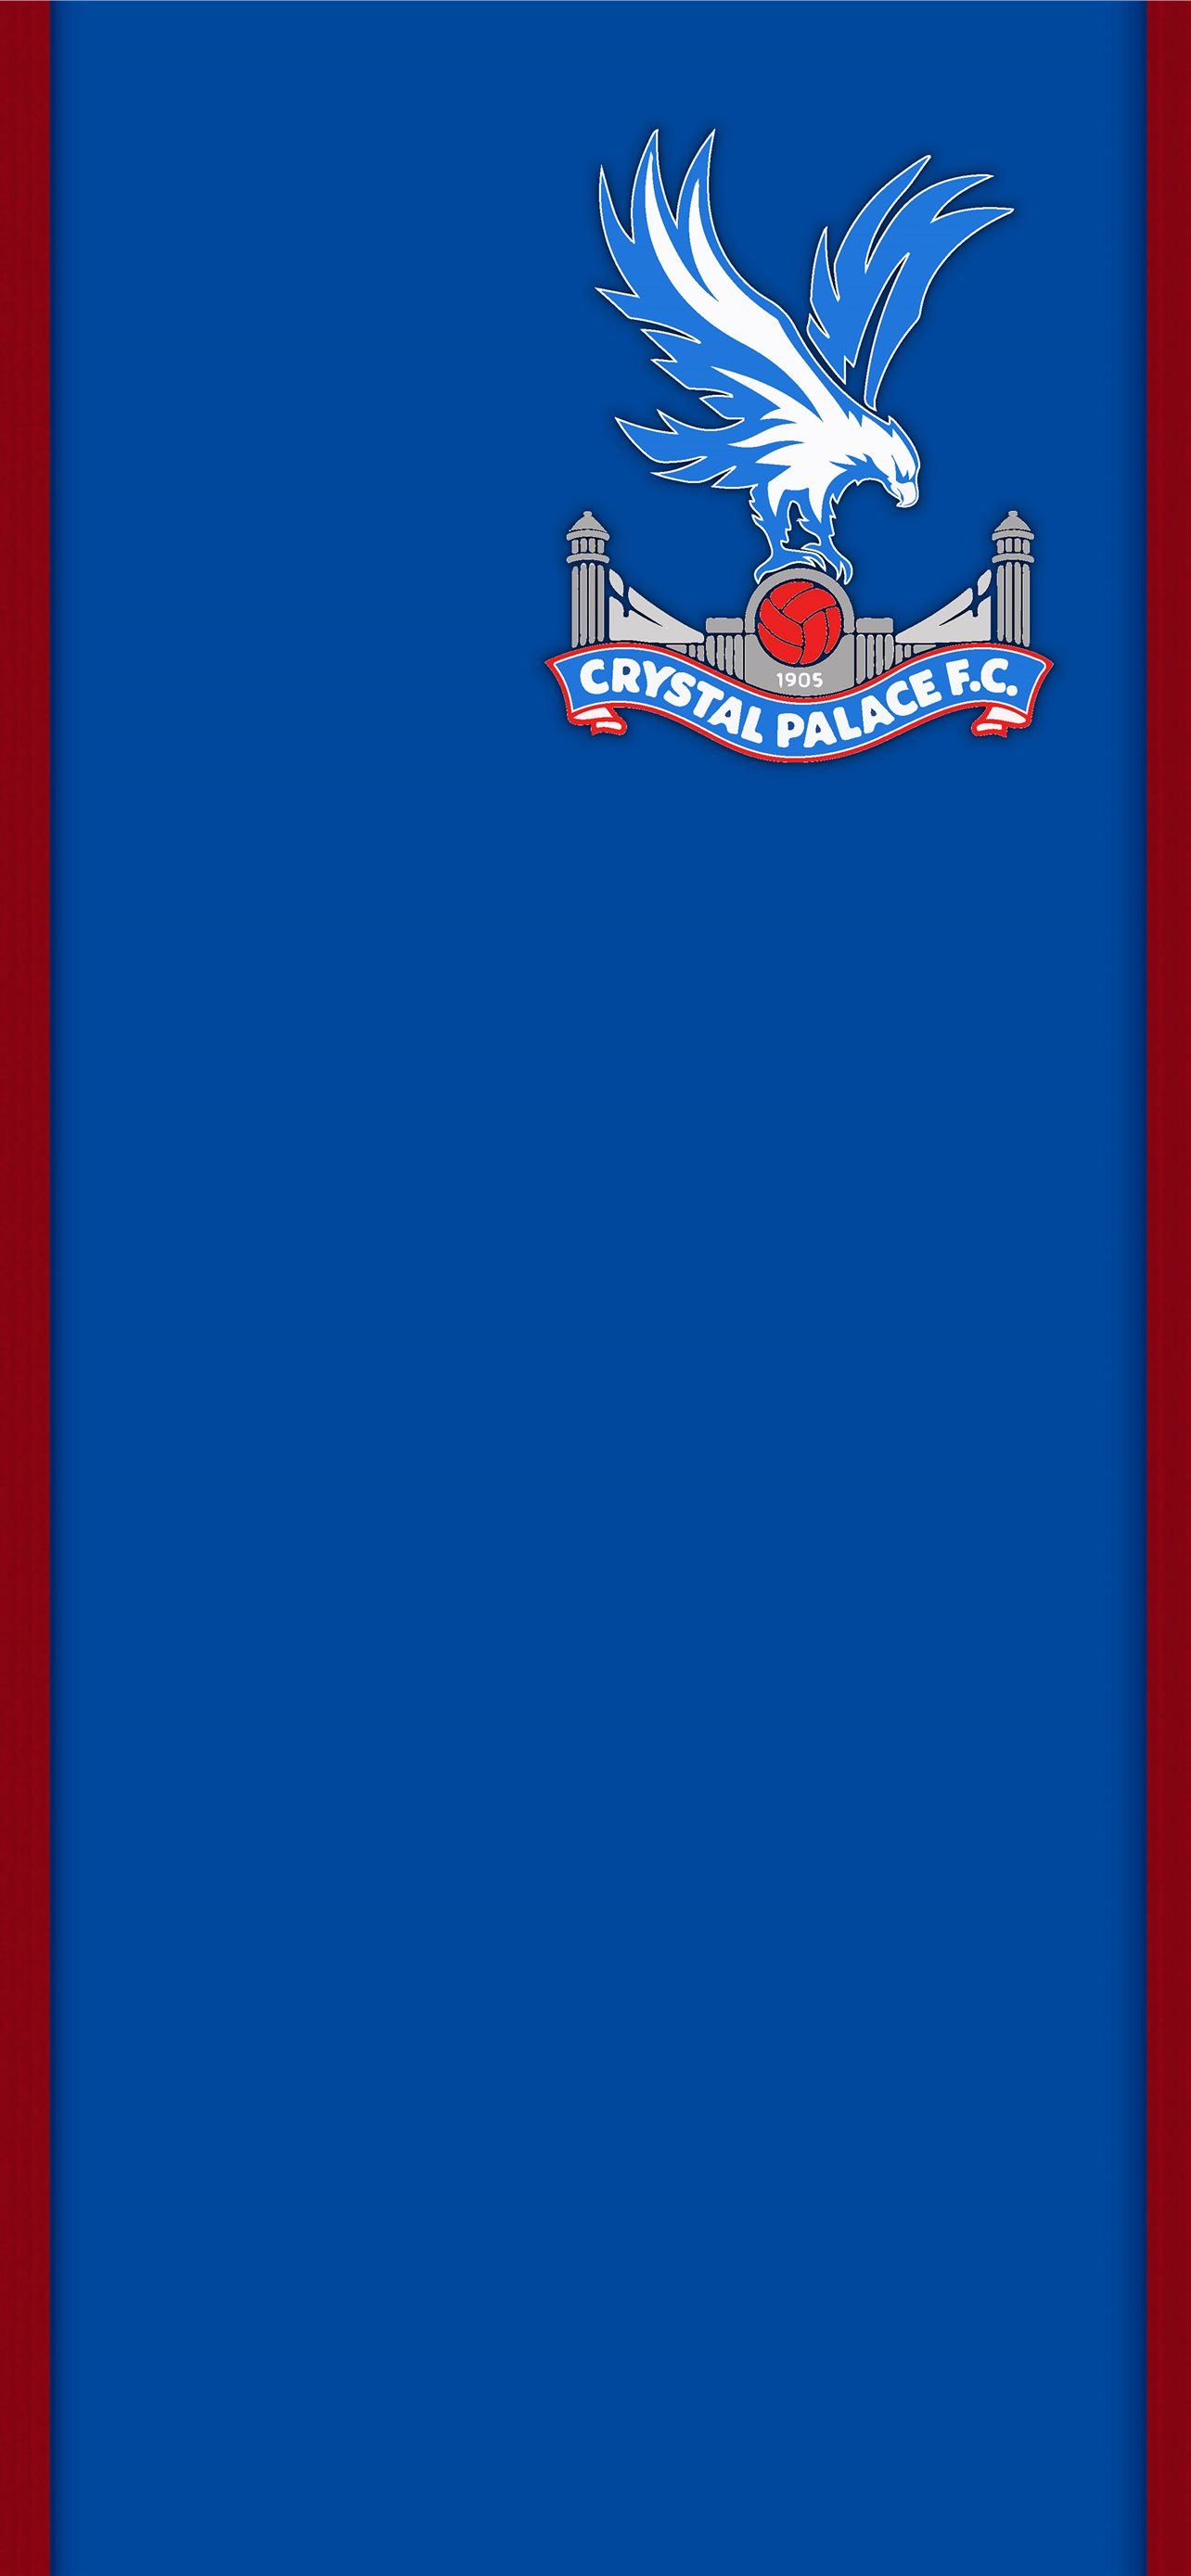 crystal palace iPhone Wallpaper Free Download